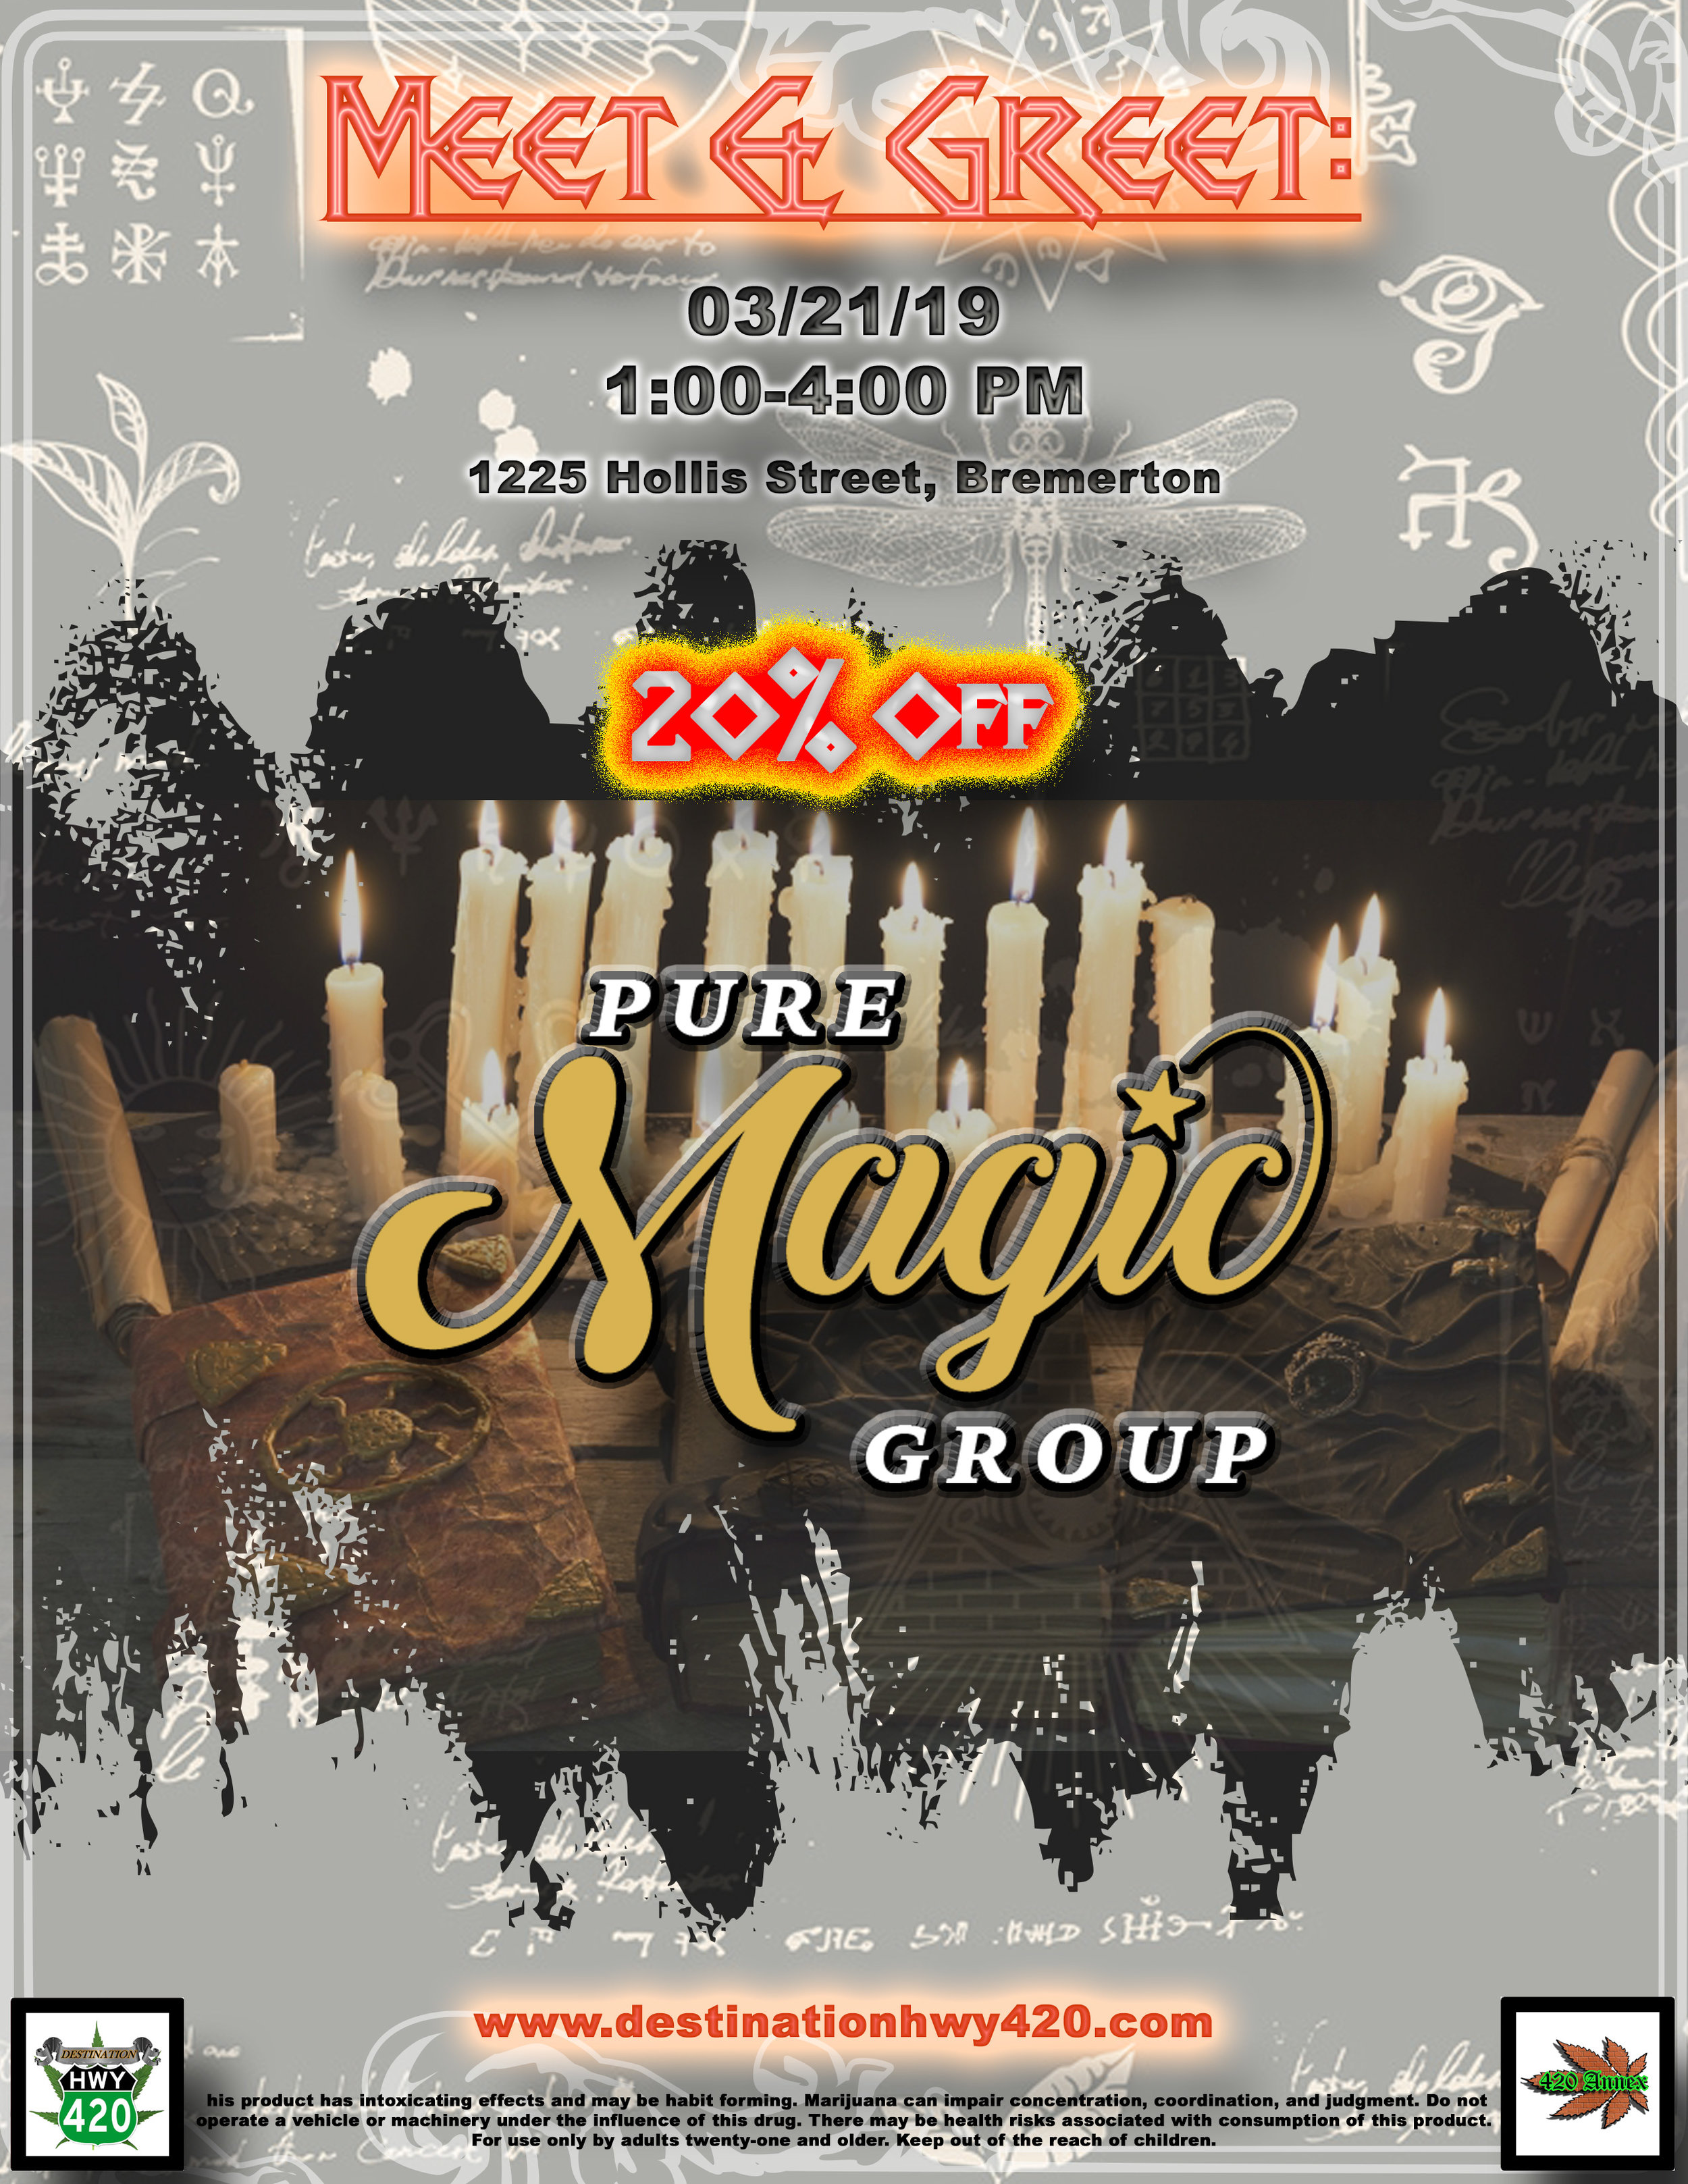 Pure Magic Group is a Tier 2 marijuana producer/processor located in Rochester, WA. Pure Magic Group produces some excellent concentrates such as their LSD Live Resin and Skunk #1 Live Resin. Pure Magic Group also produces vape cartridges with a variety of cannabis strains such as Apple Jacks, Strawberry Lemonade, and Lime OG. Pure Magic marijuana products are available at Destination HWY 420, in East Bremerton, WA.